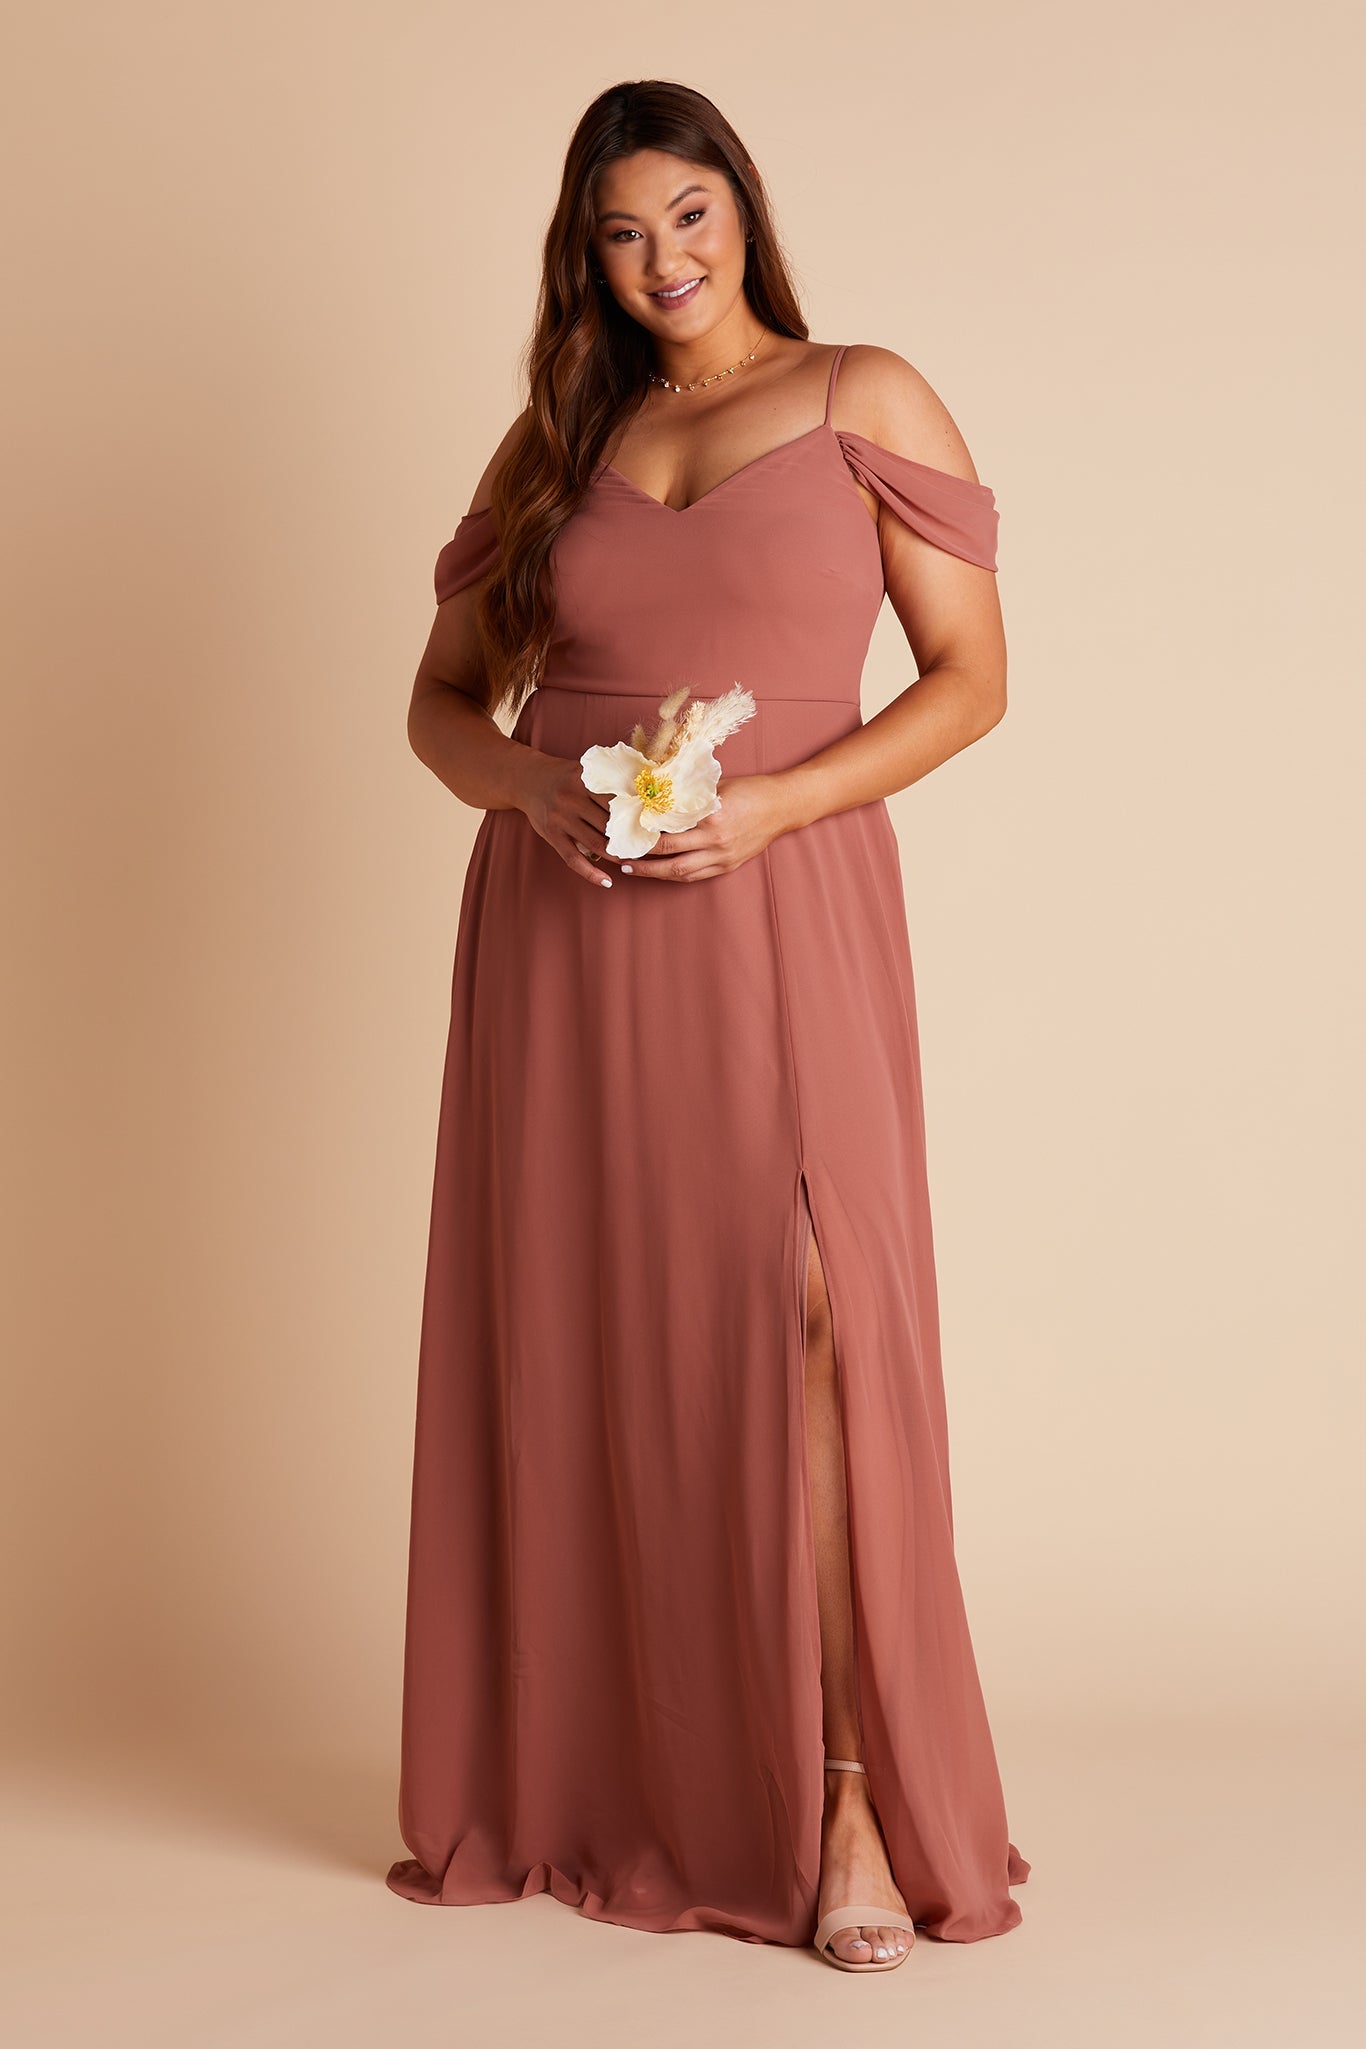 Devin convertible plus size bridesmaid dress with slit in desert rose chiffon by Birdy Grey, front view